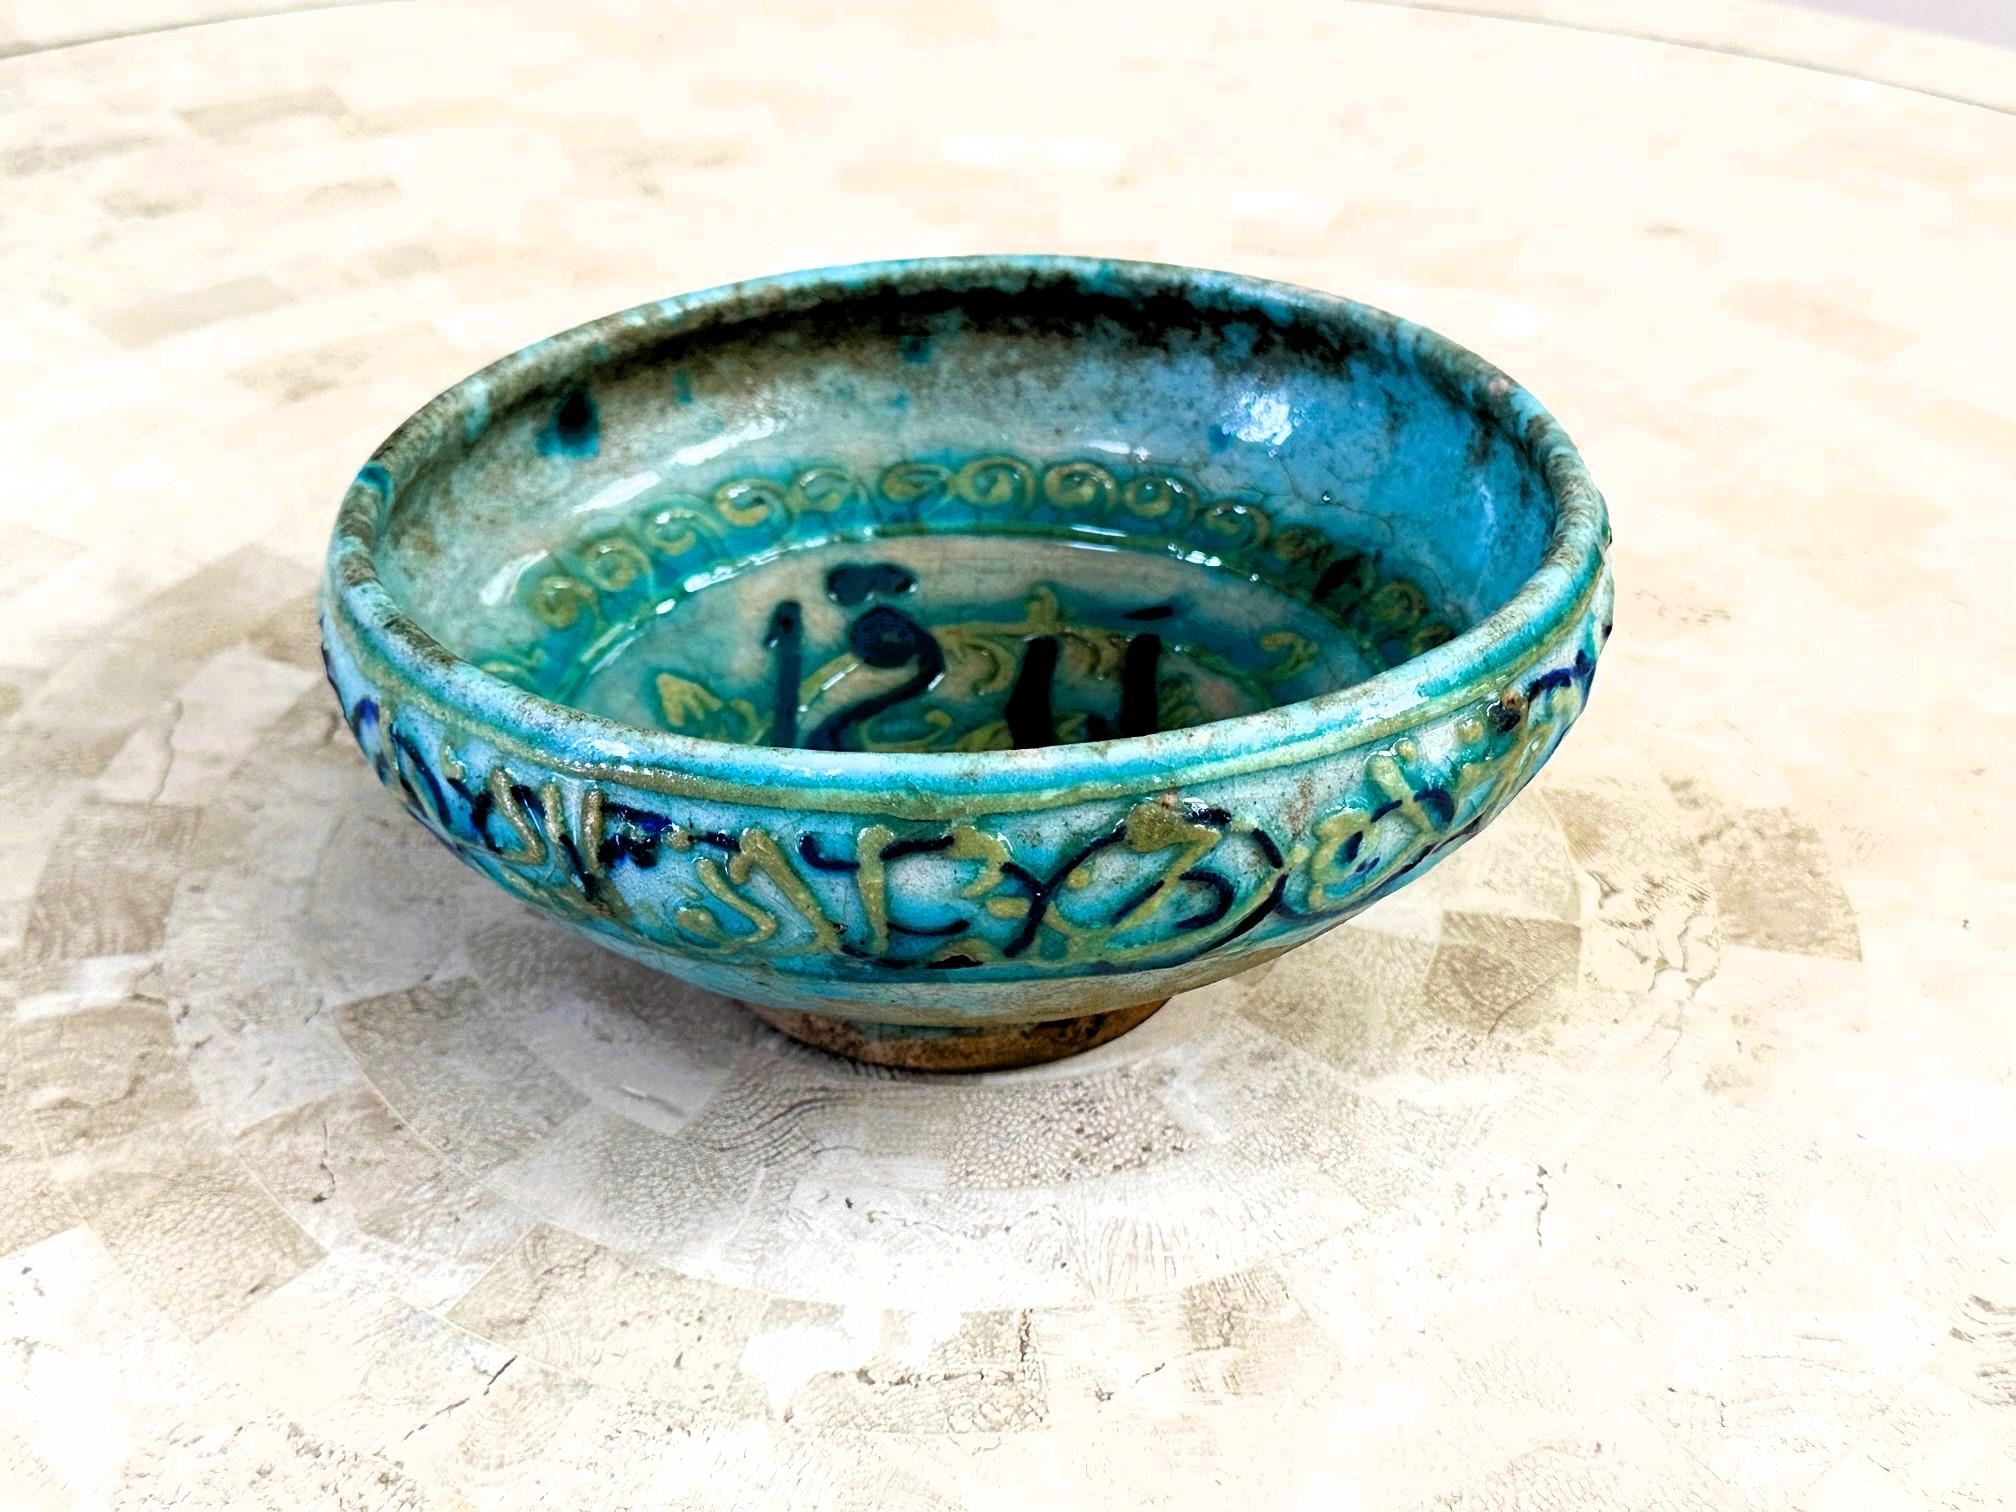 An Islamic glazed ceramic bowl with inscription attributed to Raqqa ware, produced during the Ayyubid dynasty (12-13th century) in the town of Raqqa in nowadays northeastern Syria. The bowl figures a generous volume with a rounded body tapered to